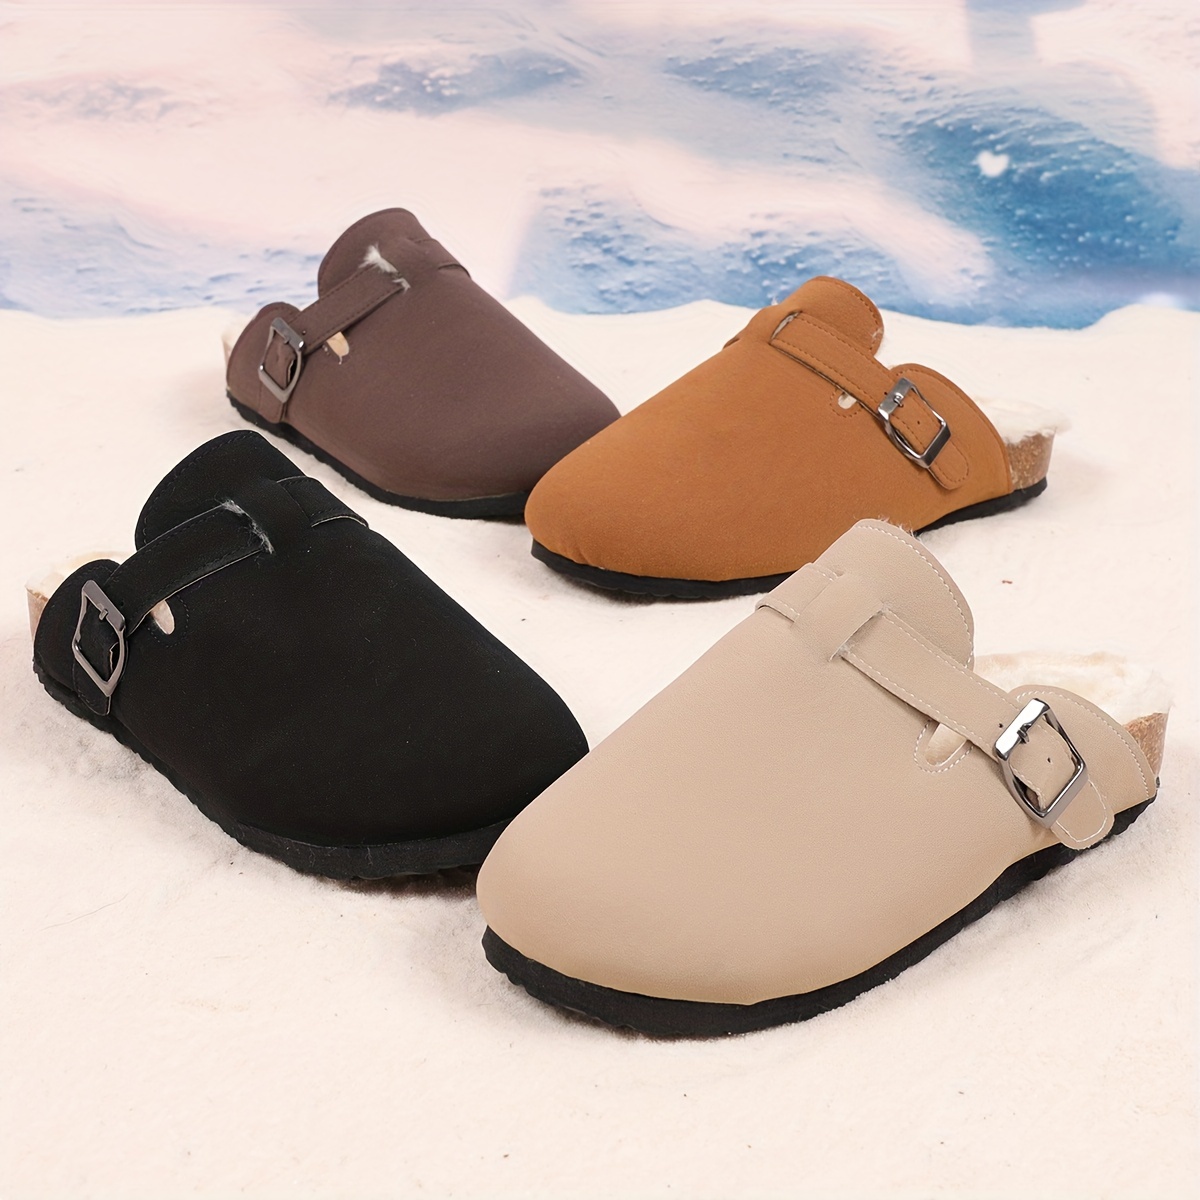 womens buckle strap detailed mules casual slip on plush lined shoes comfortable flat winter shoes details 1